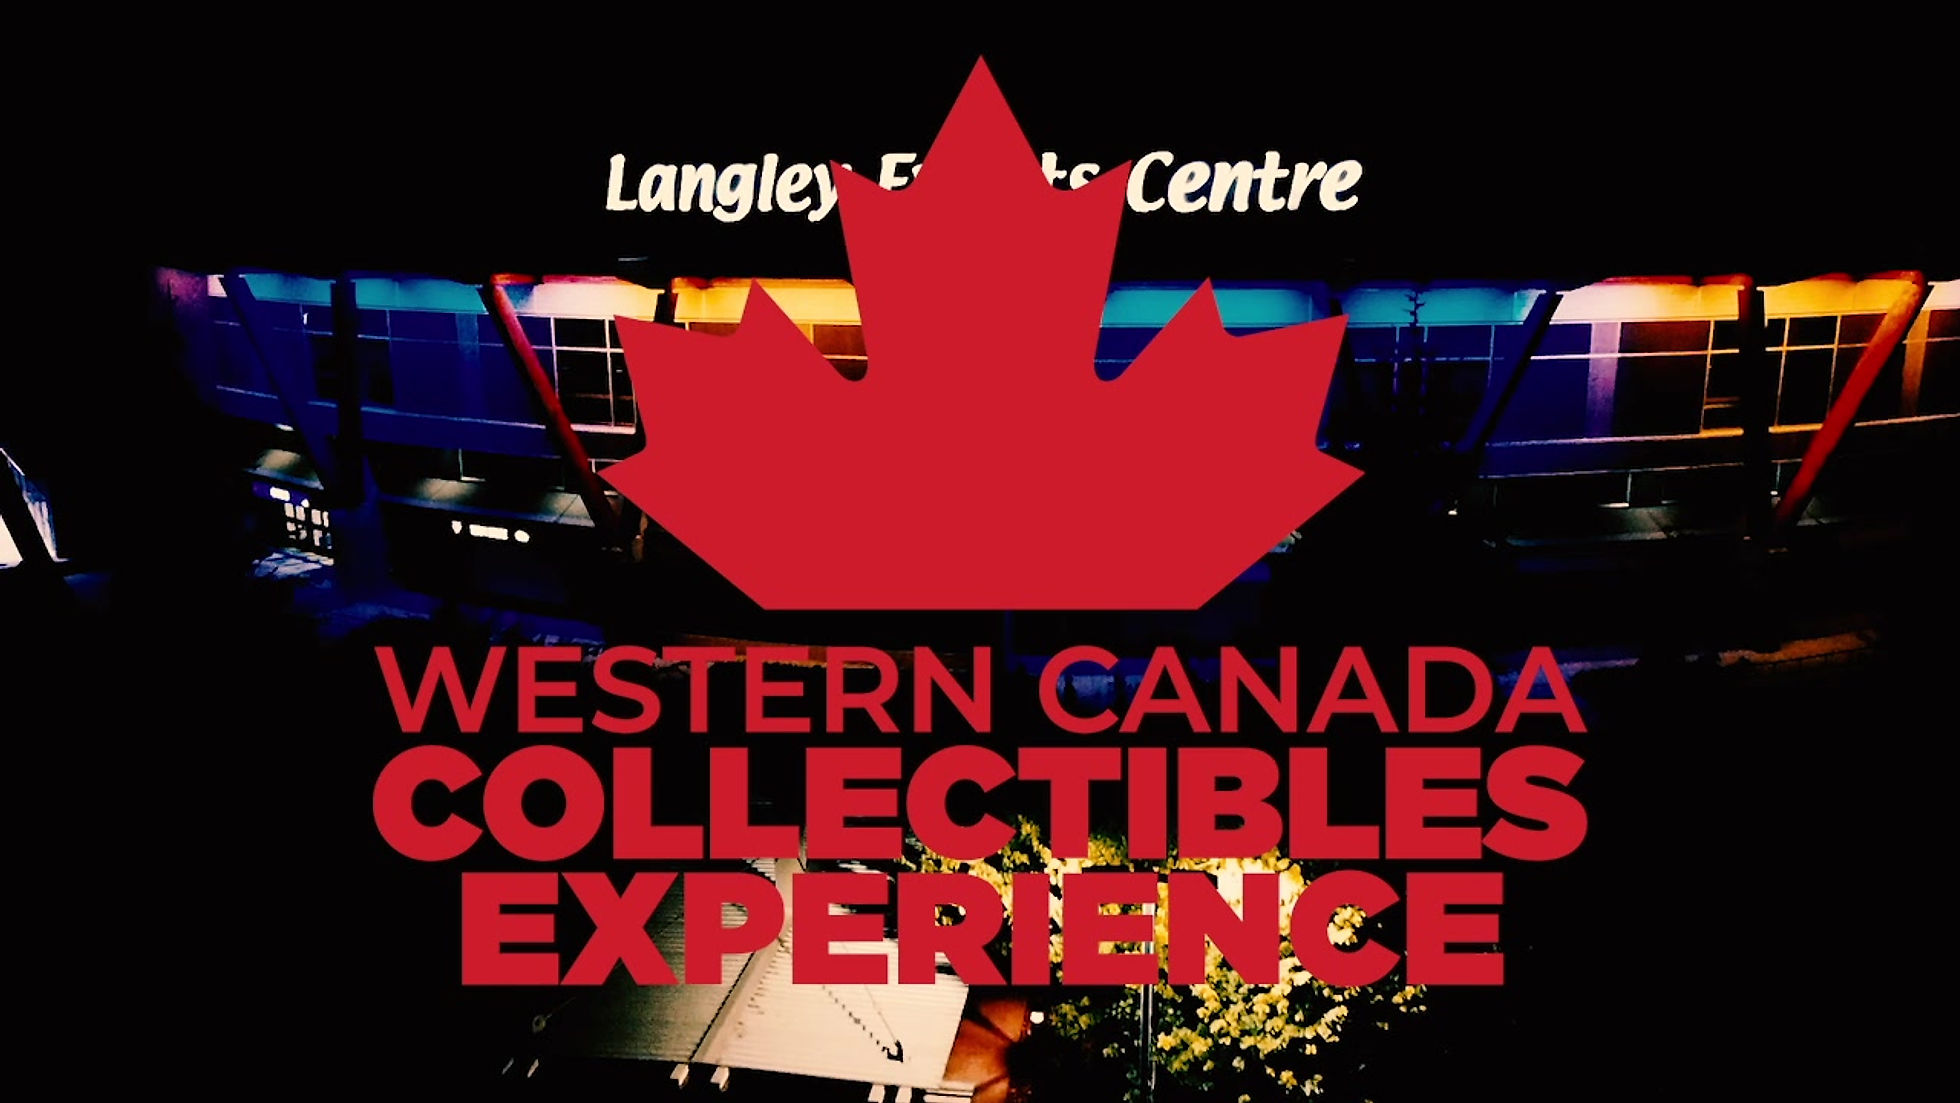 Western Canada Collectibles Experience